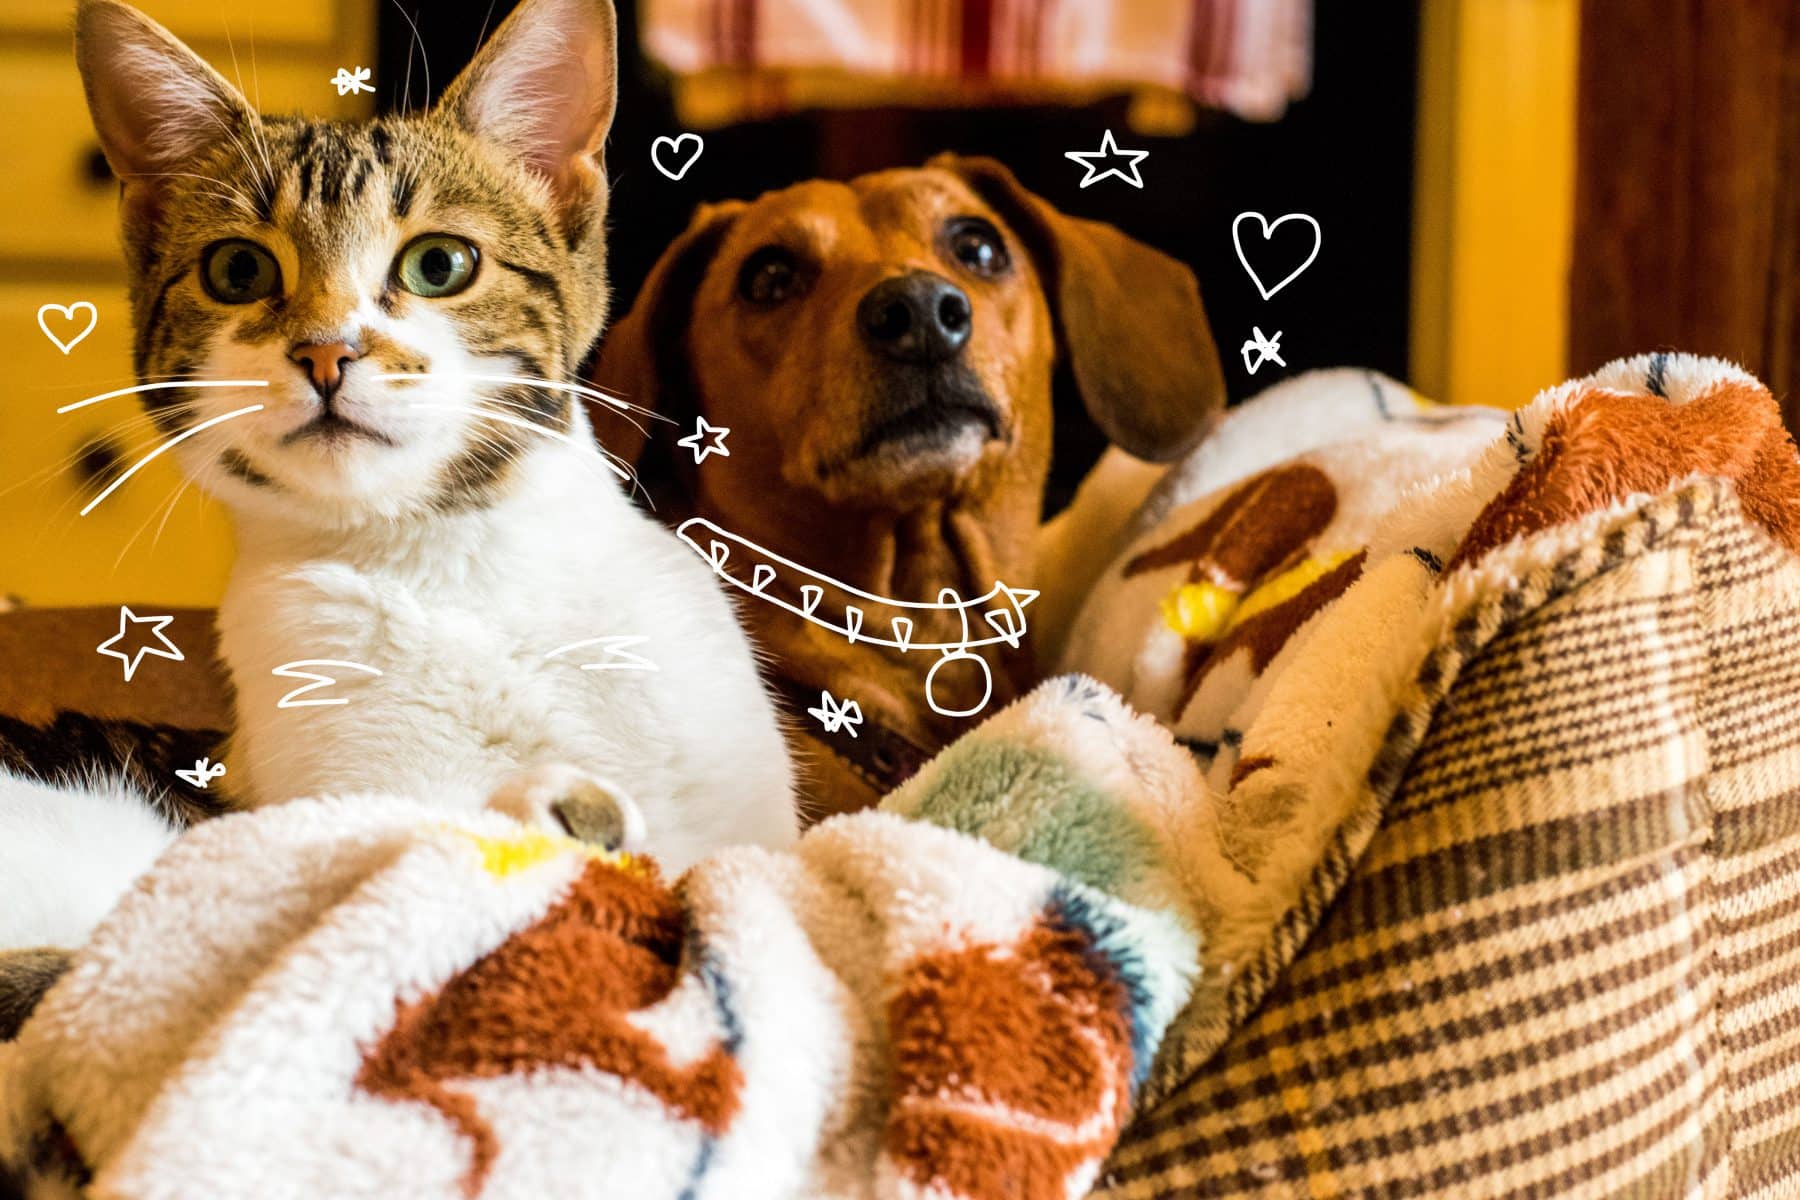 a cat and dog together on a sofa. Pet insurance.